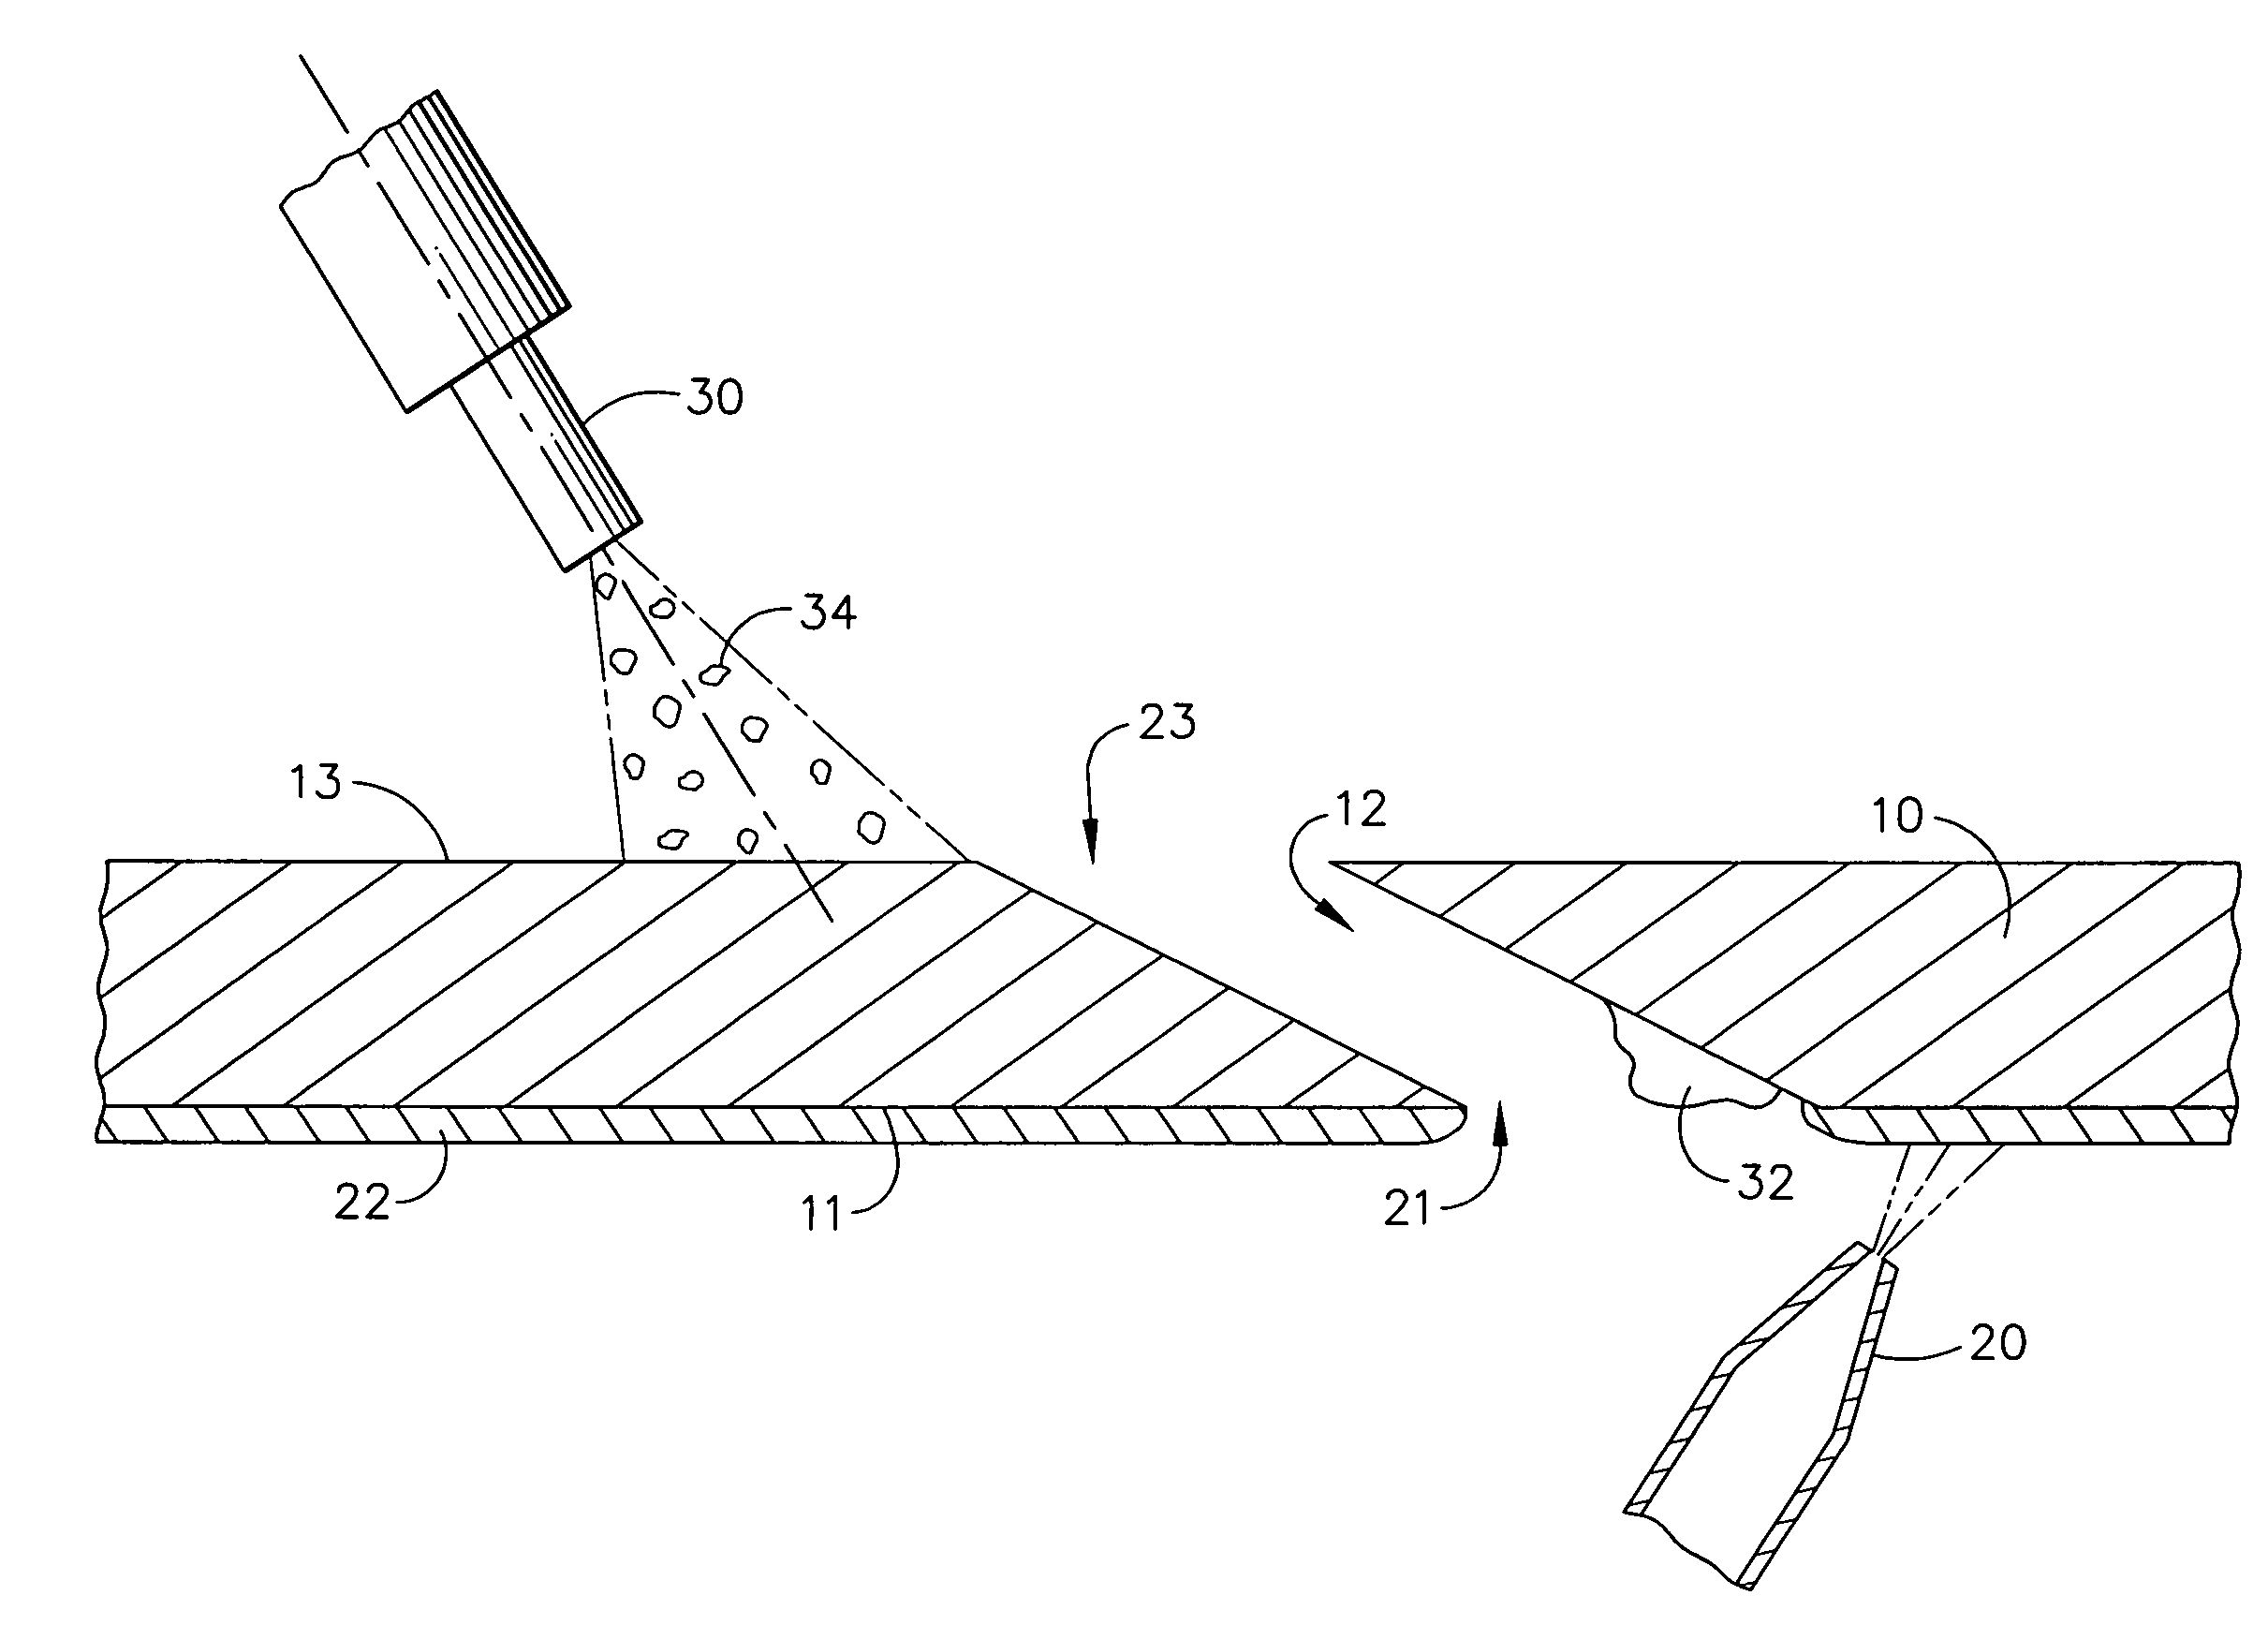 Method for concurrent thermal spray and cooling hole cleaning